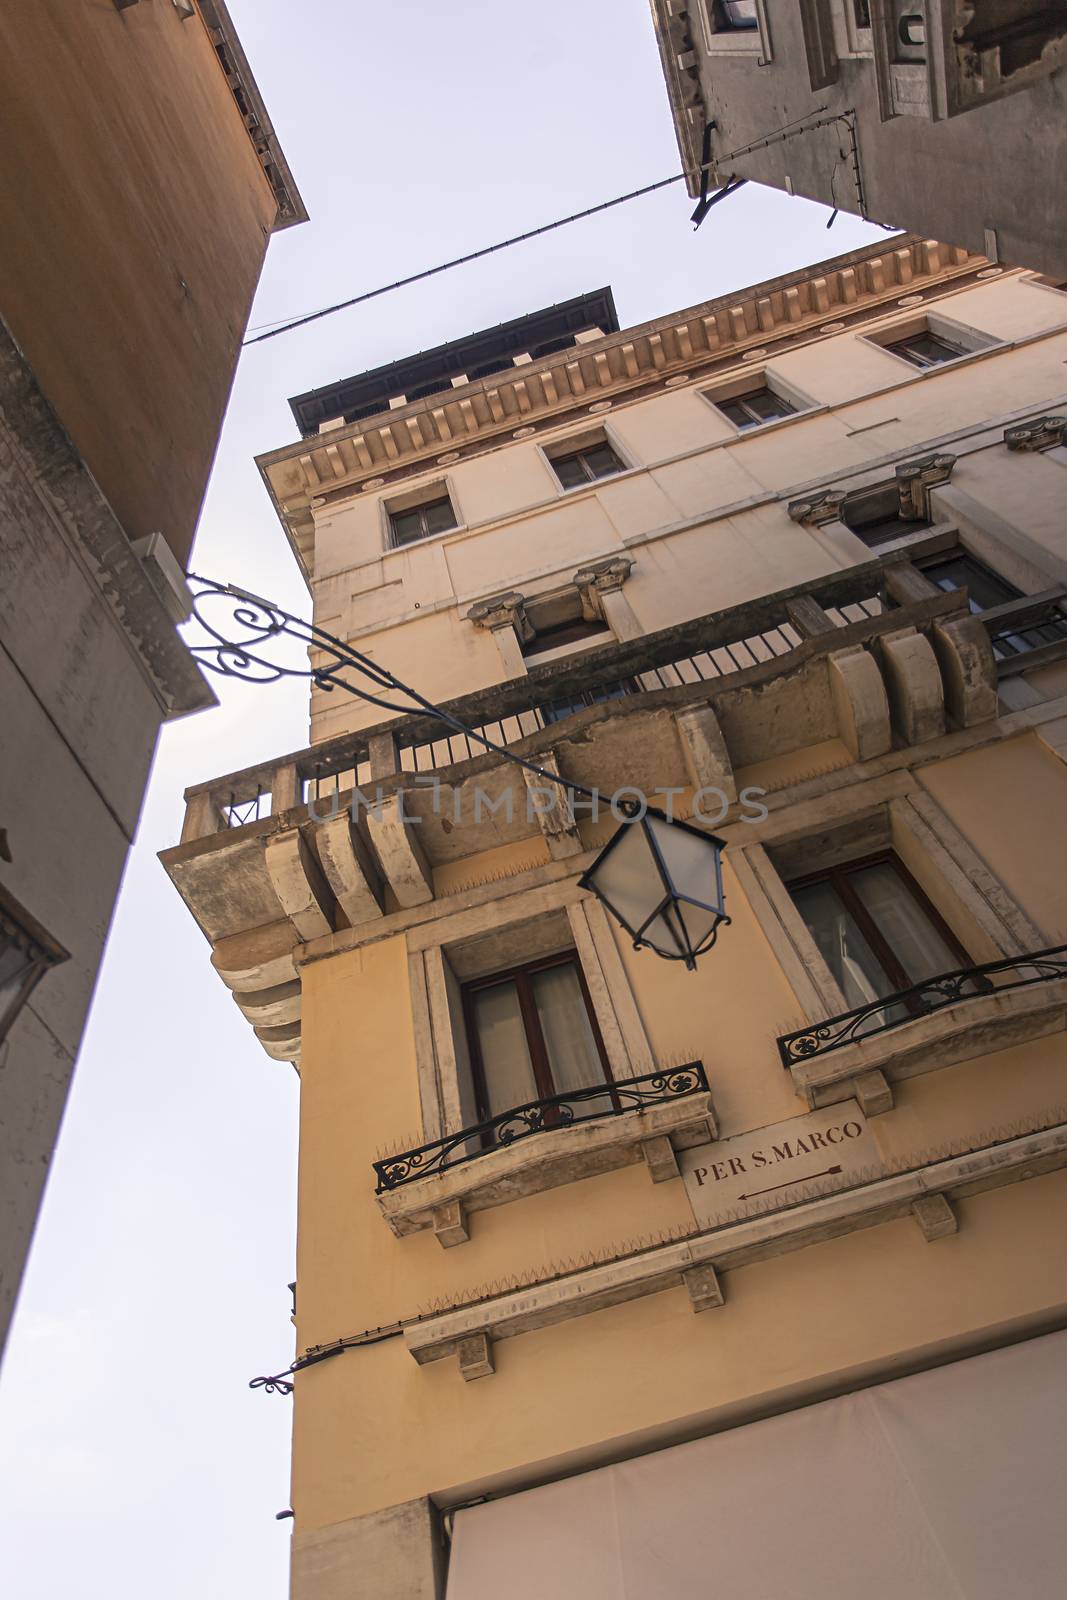 Detail of building with window and details and architecture in Venice in Italy